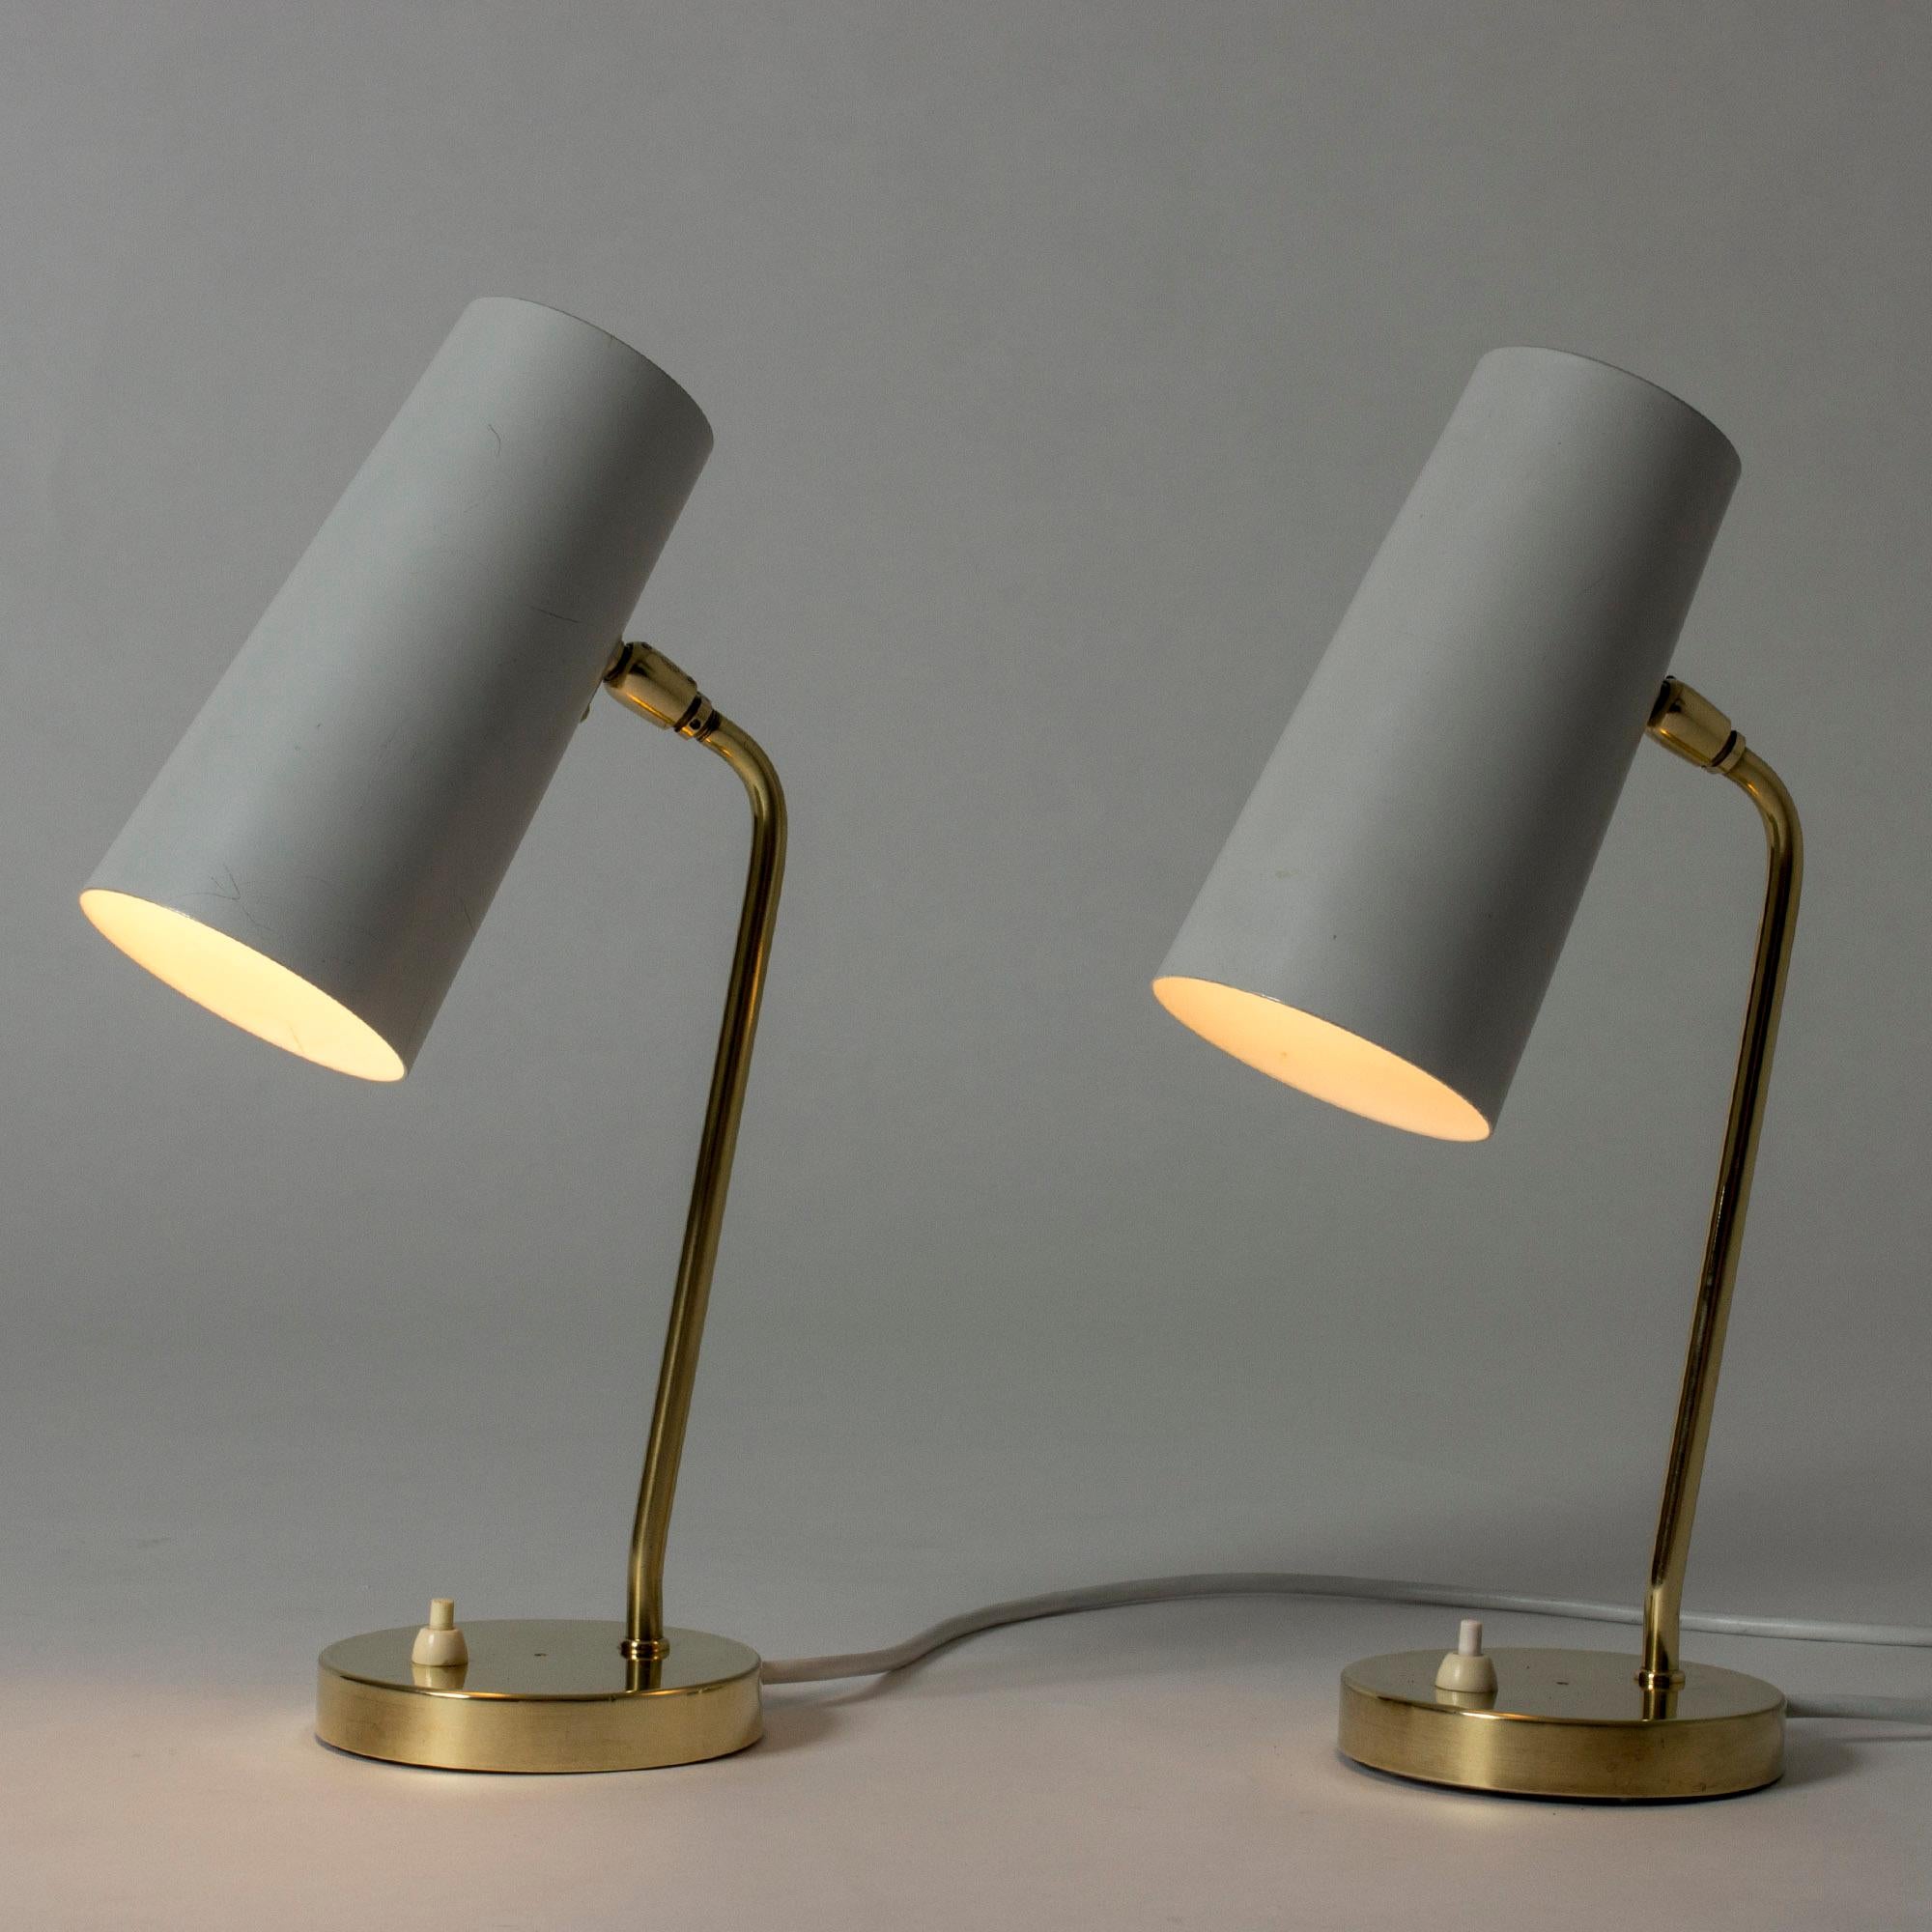 Lacquer Pair of Table Lamps from Böhlmarks, Sweden, 1950s For Sale